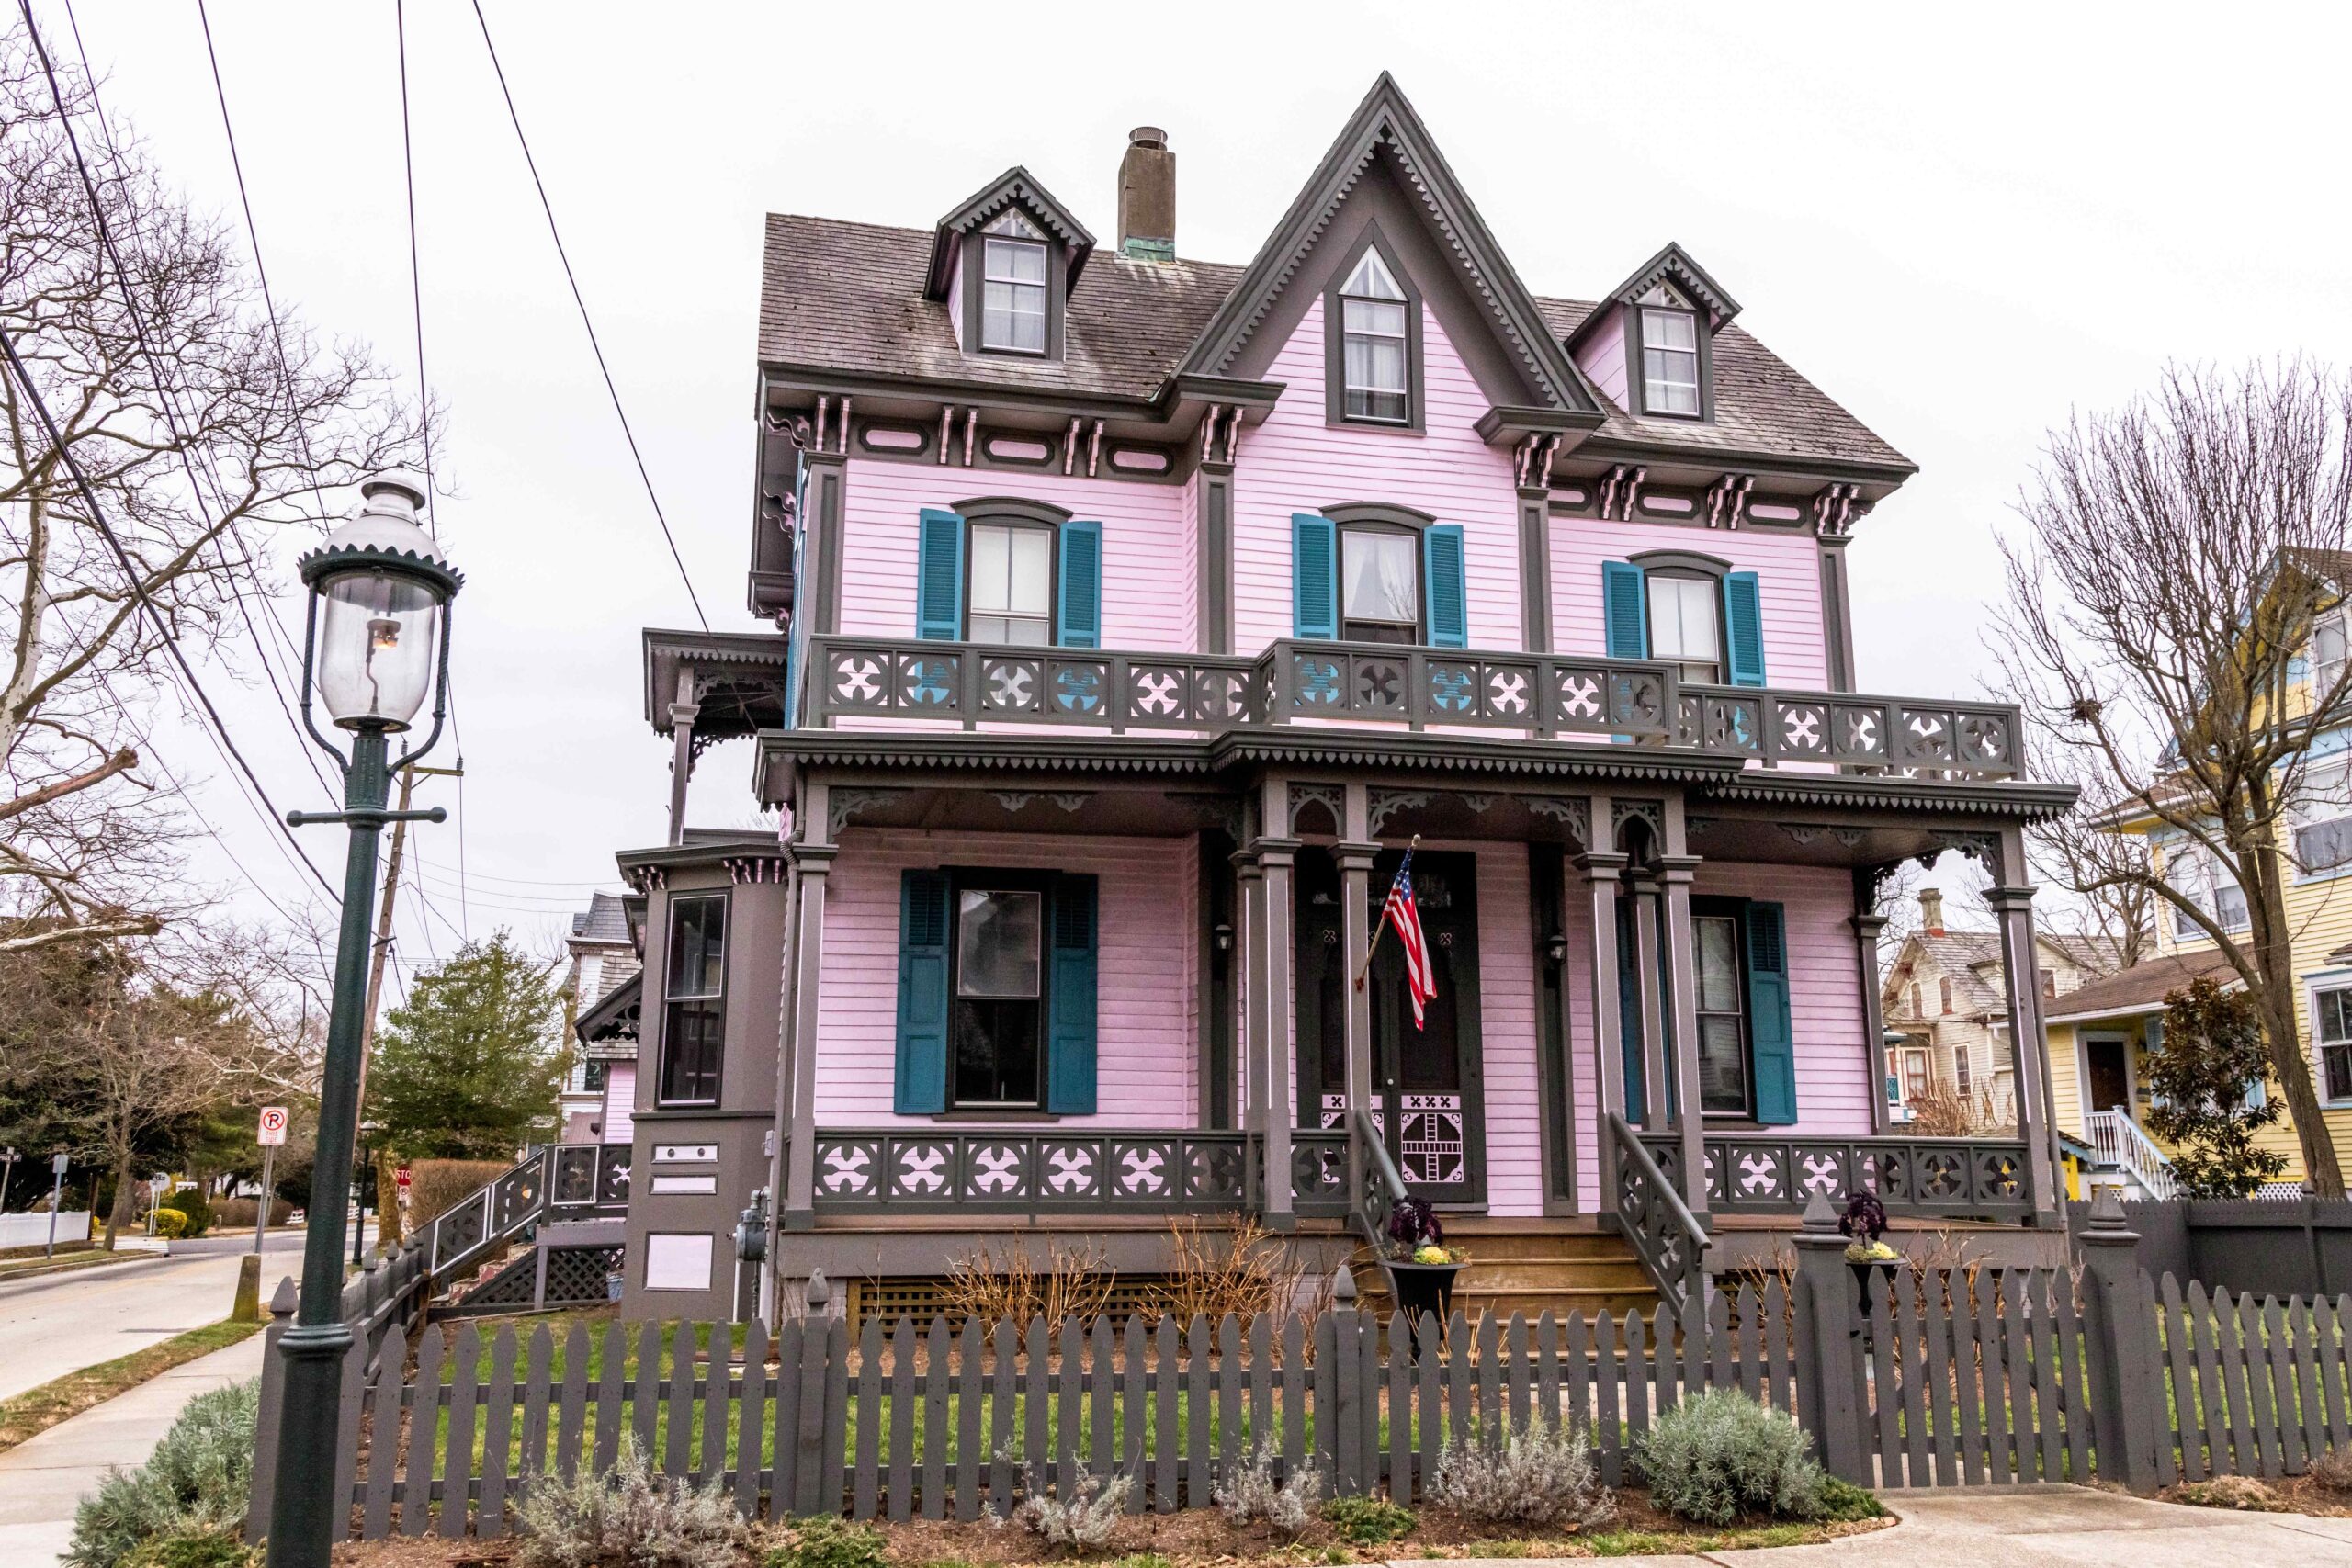 A pink, brown, and teal Victorian style house with a cloudy gray sky